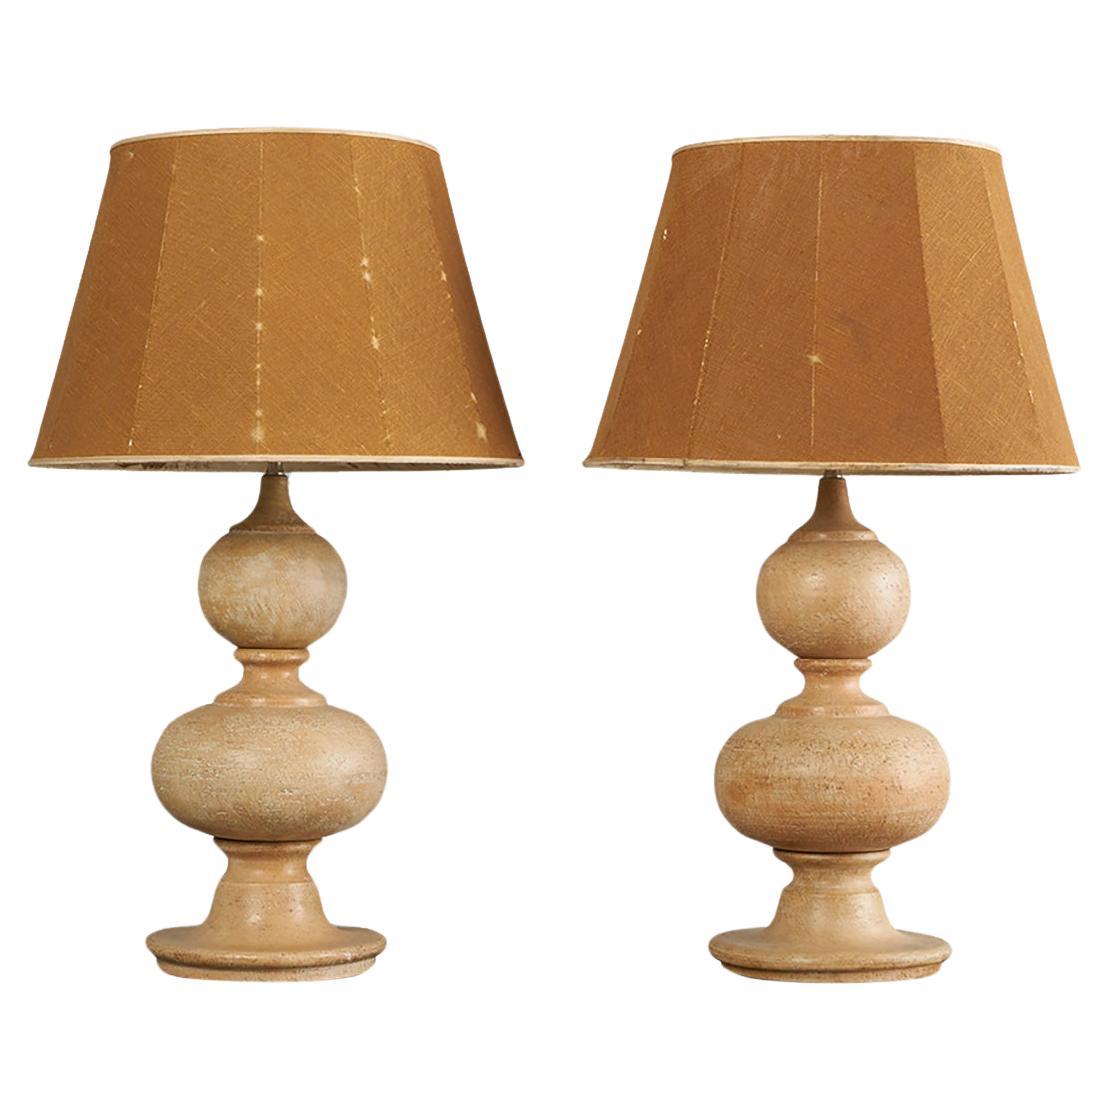 Monumental Pair of Earthenware Italian Ceramic Lamps by Ugo Zaccagnini  For Sale